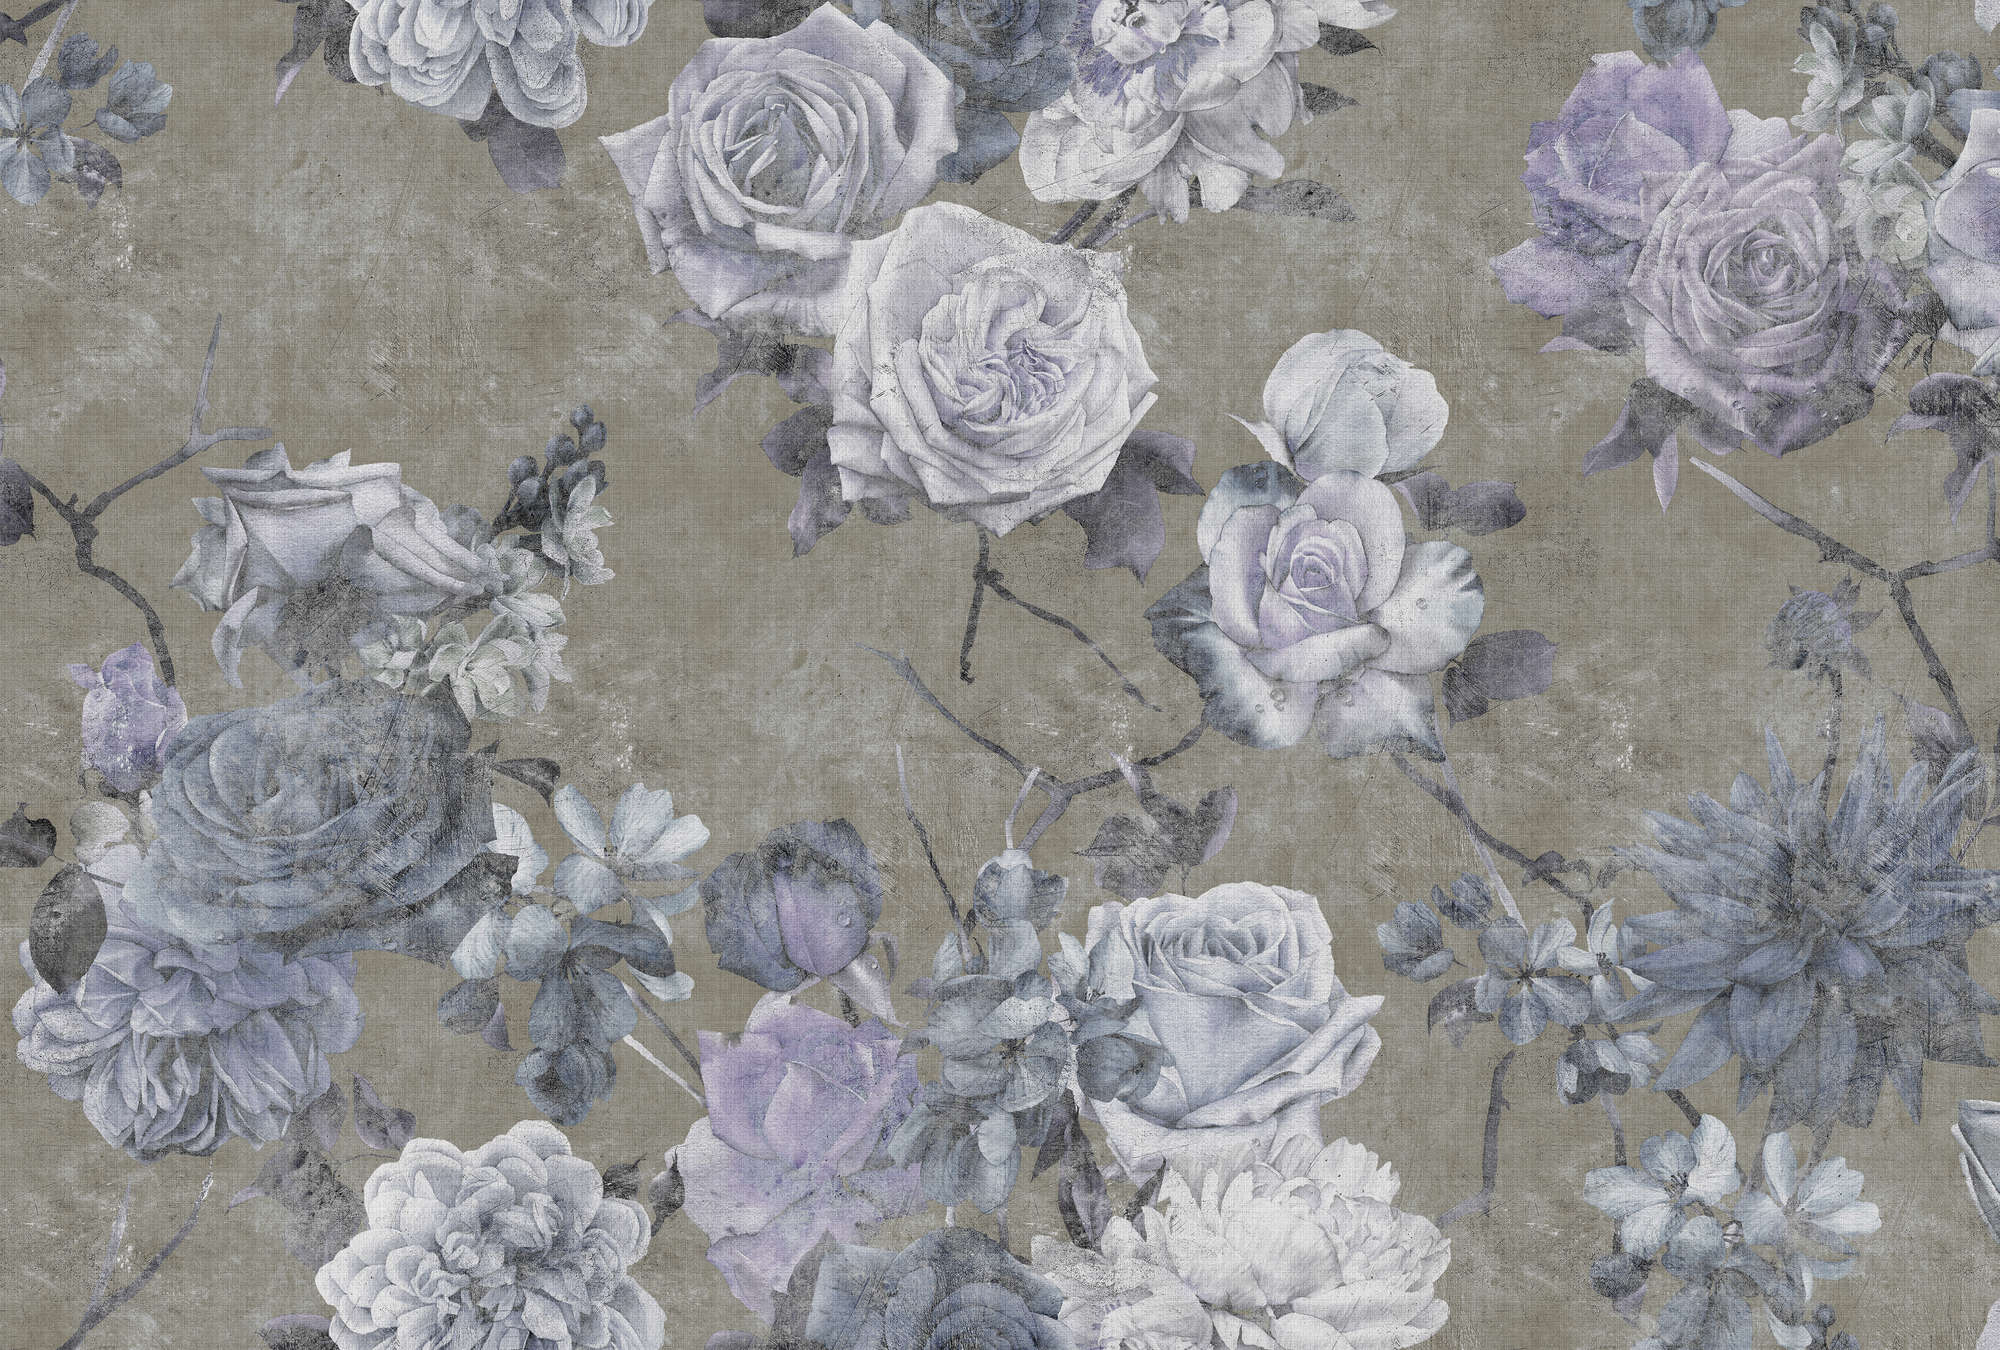             Sleeping Beauty 1 - Wallpaper in natural linen structure rose blossoms in used look - Blue, Taupe | Premium smooth fleece
        